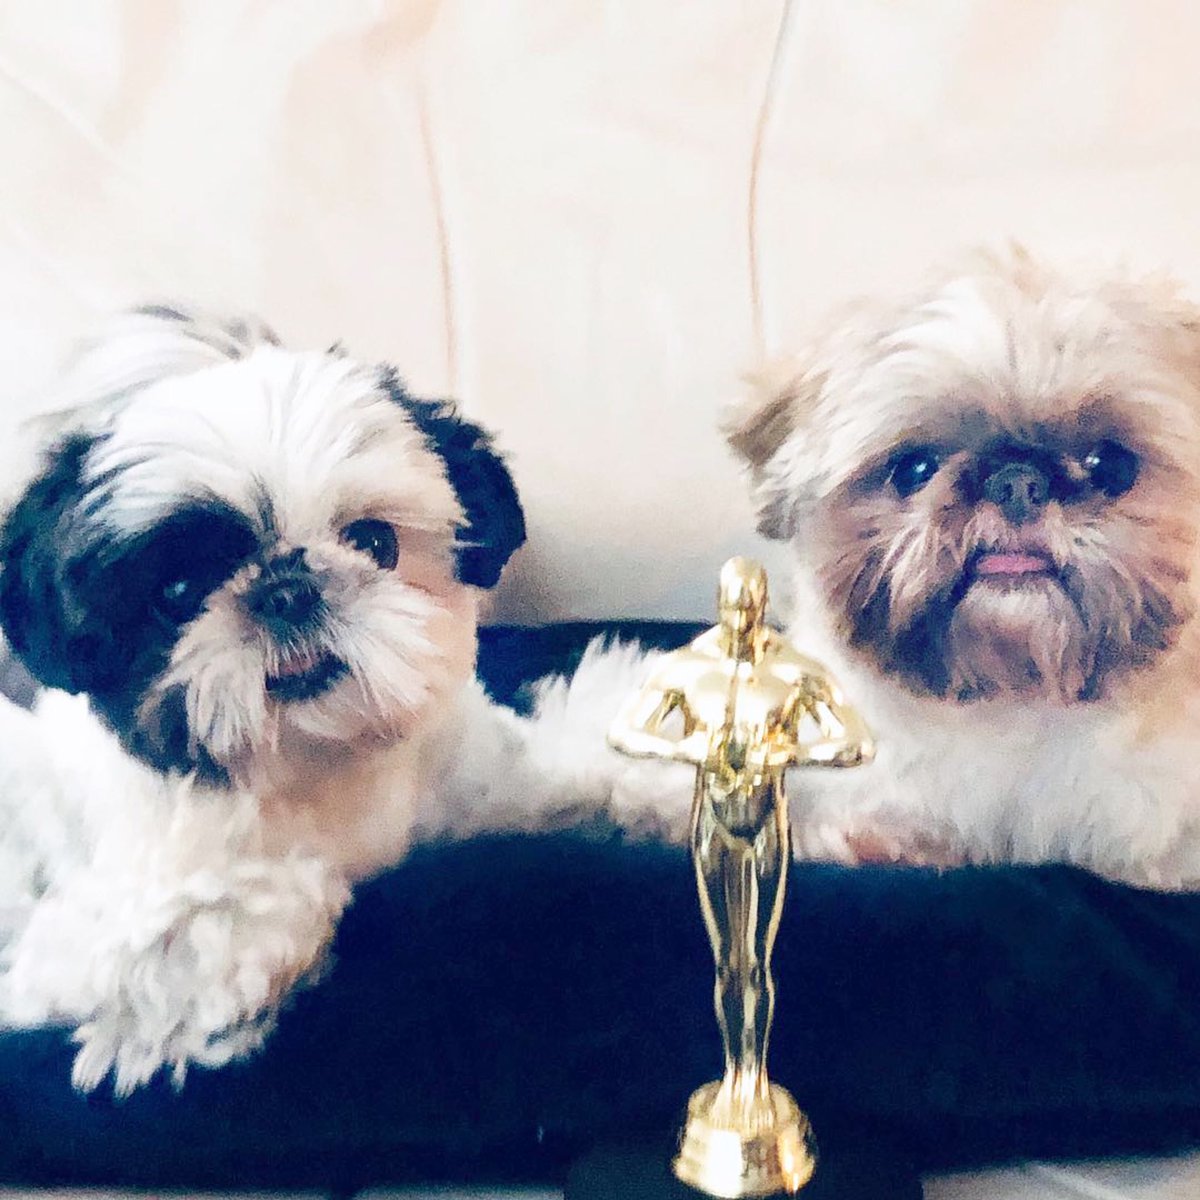 Congrats to all the nominees + winners tonight @Oscars2019 👏🏼@mowienzeppelin And the best #Oscar goes to: #MowieWowie + #Zeppelin!!! 🌟”Weeee are the Shih Tzus, our friends. And weeeee’ll keep on loviiiin’ ‘til the ennnnnd. We are Shih Tzuuus...of the woooorld!” #Oscar2019 #love